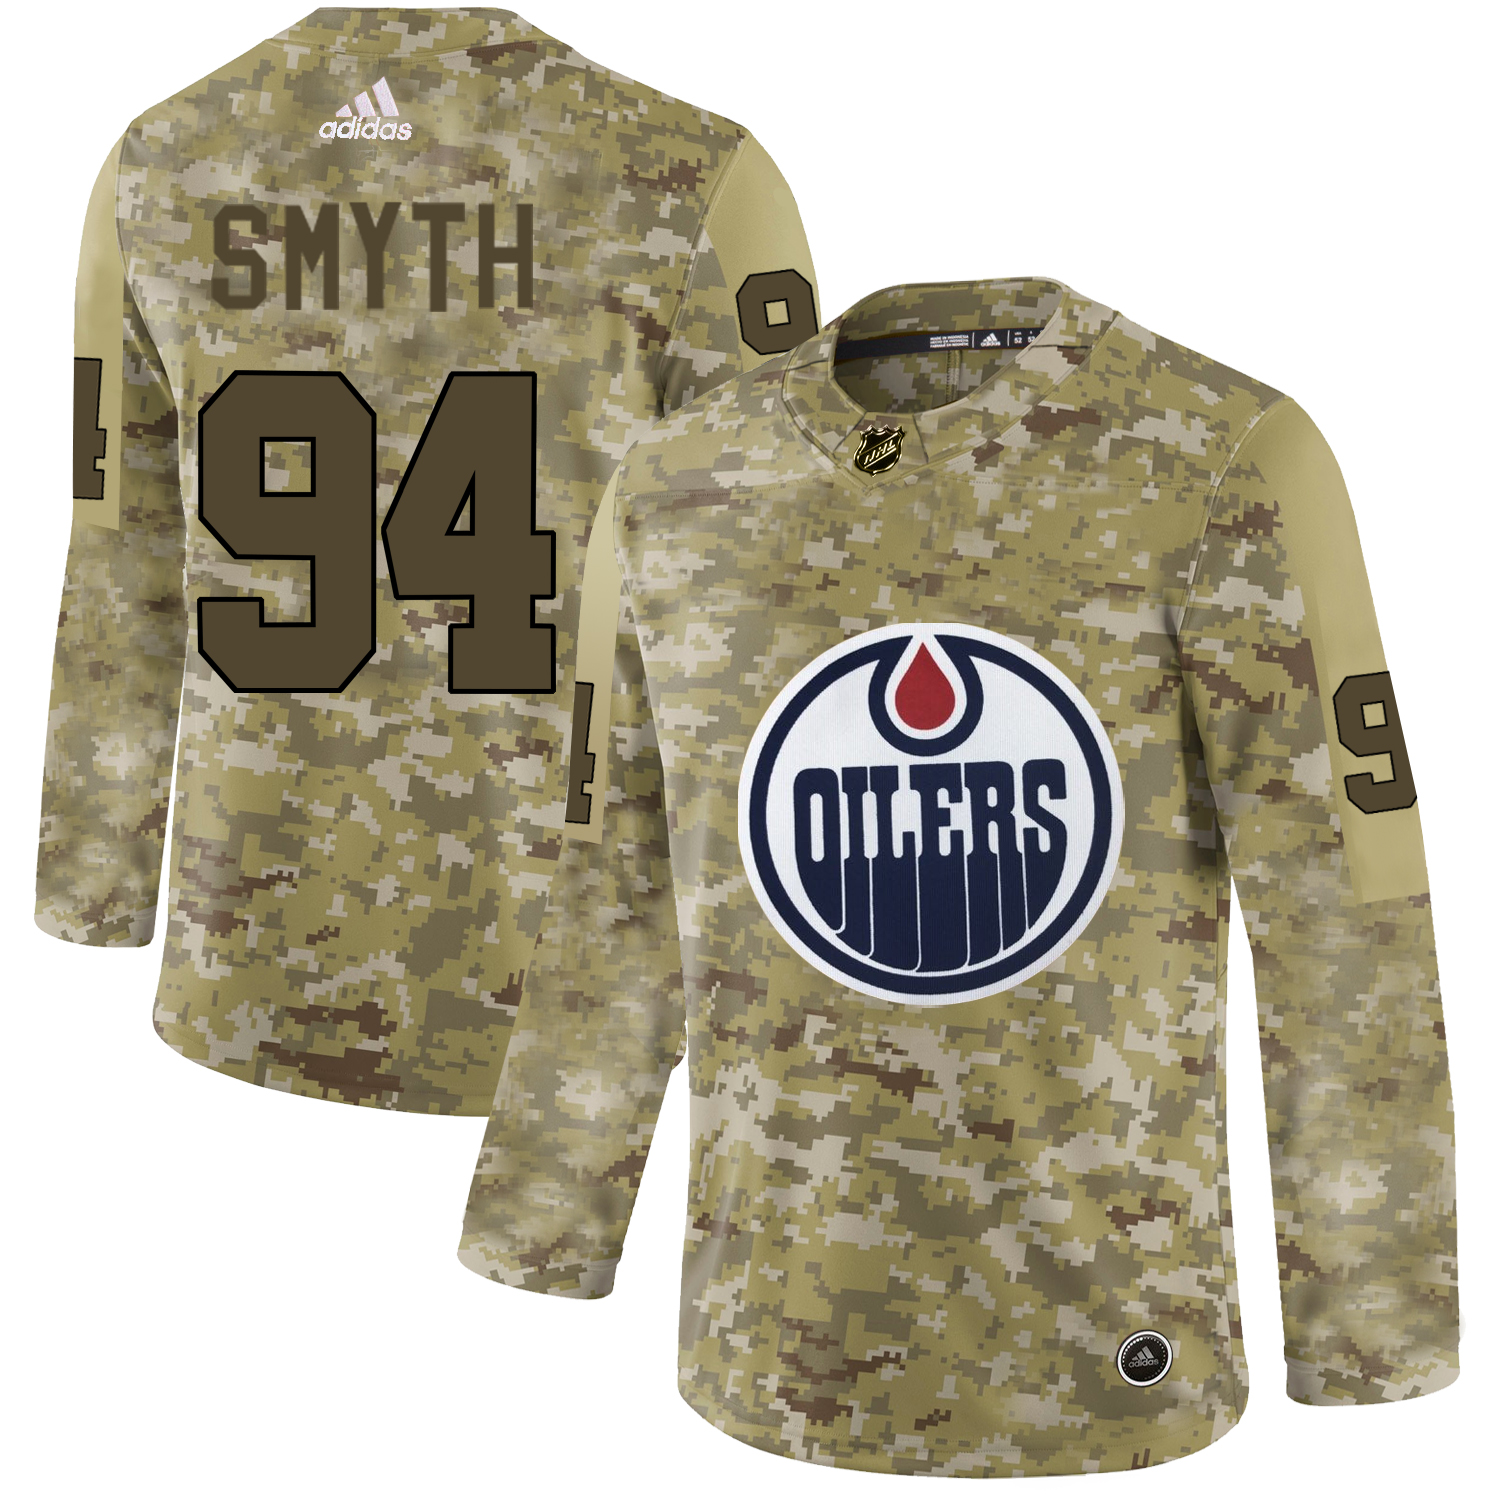 Adidas Oilers #94 Ryan Smyth Camo Authentic Stitched NHL Jersey